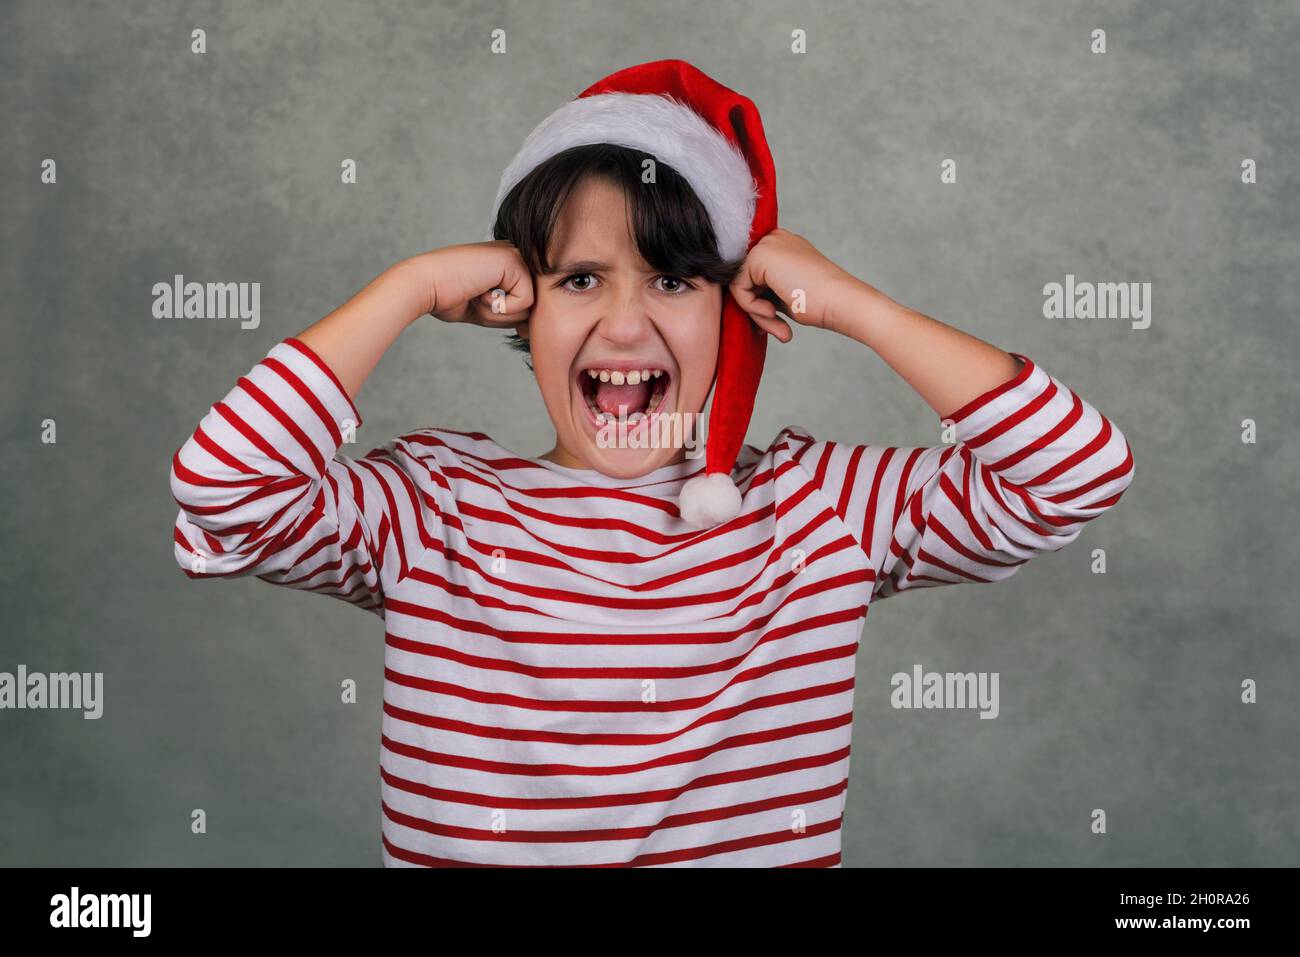 Angry kid wearing Santa Claus hat with his hands on his head over gray background Stock Photo